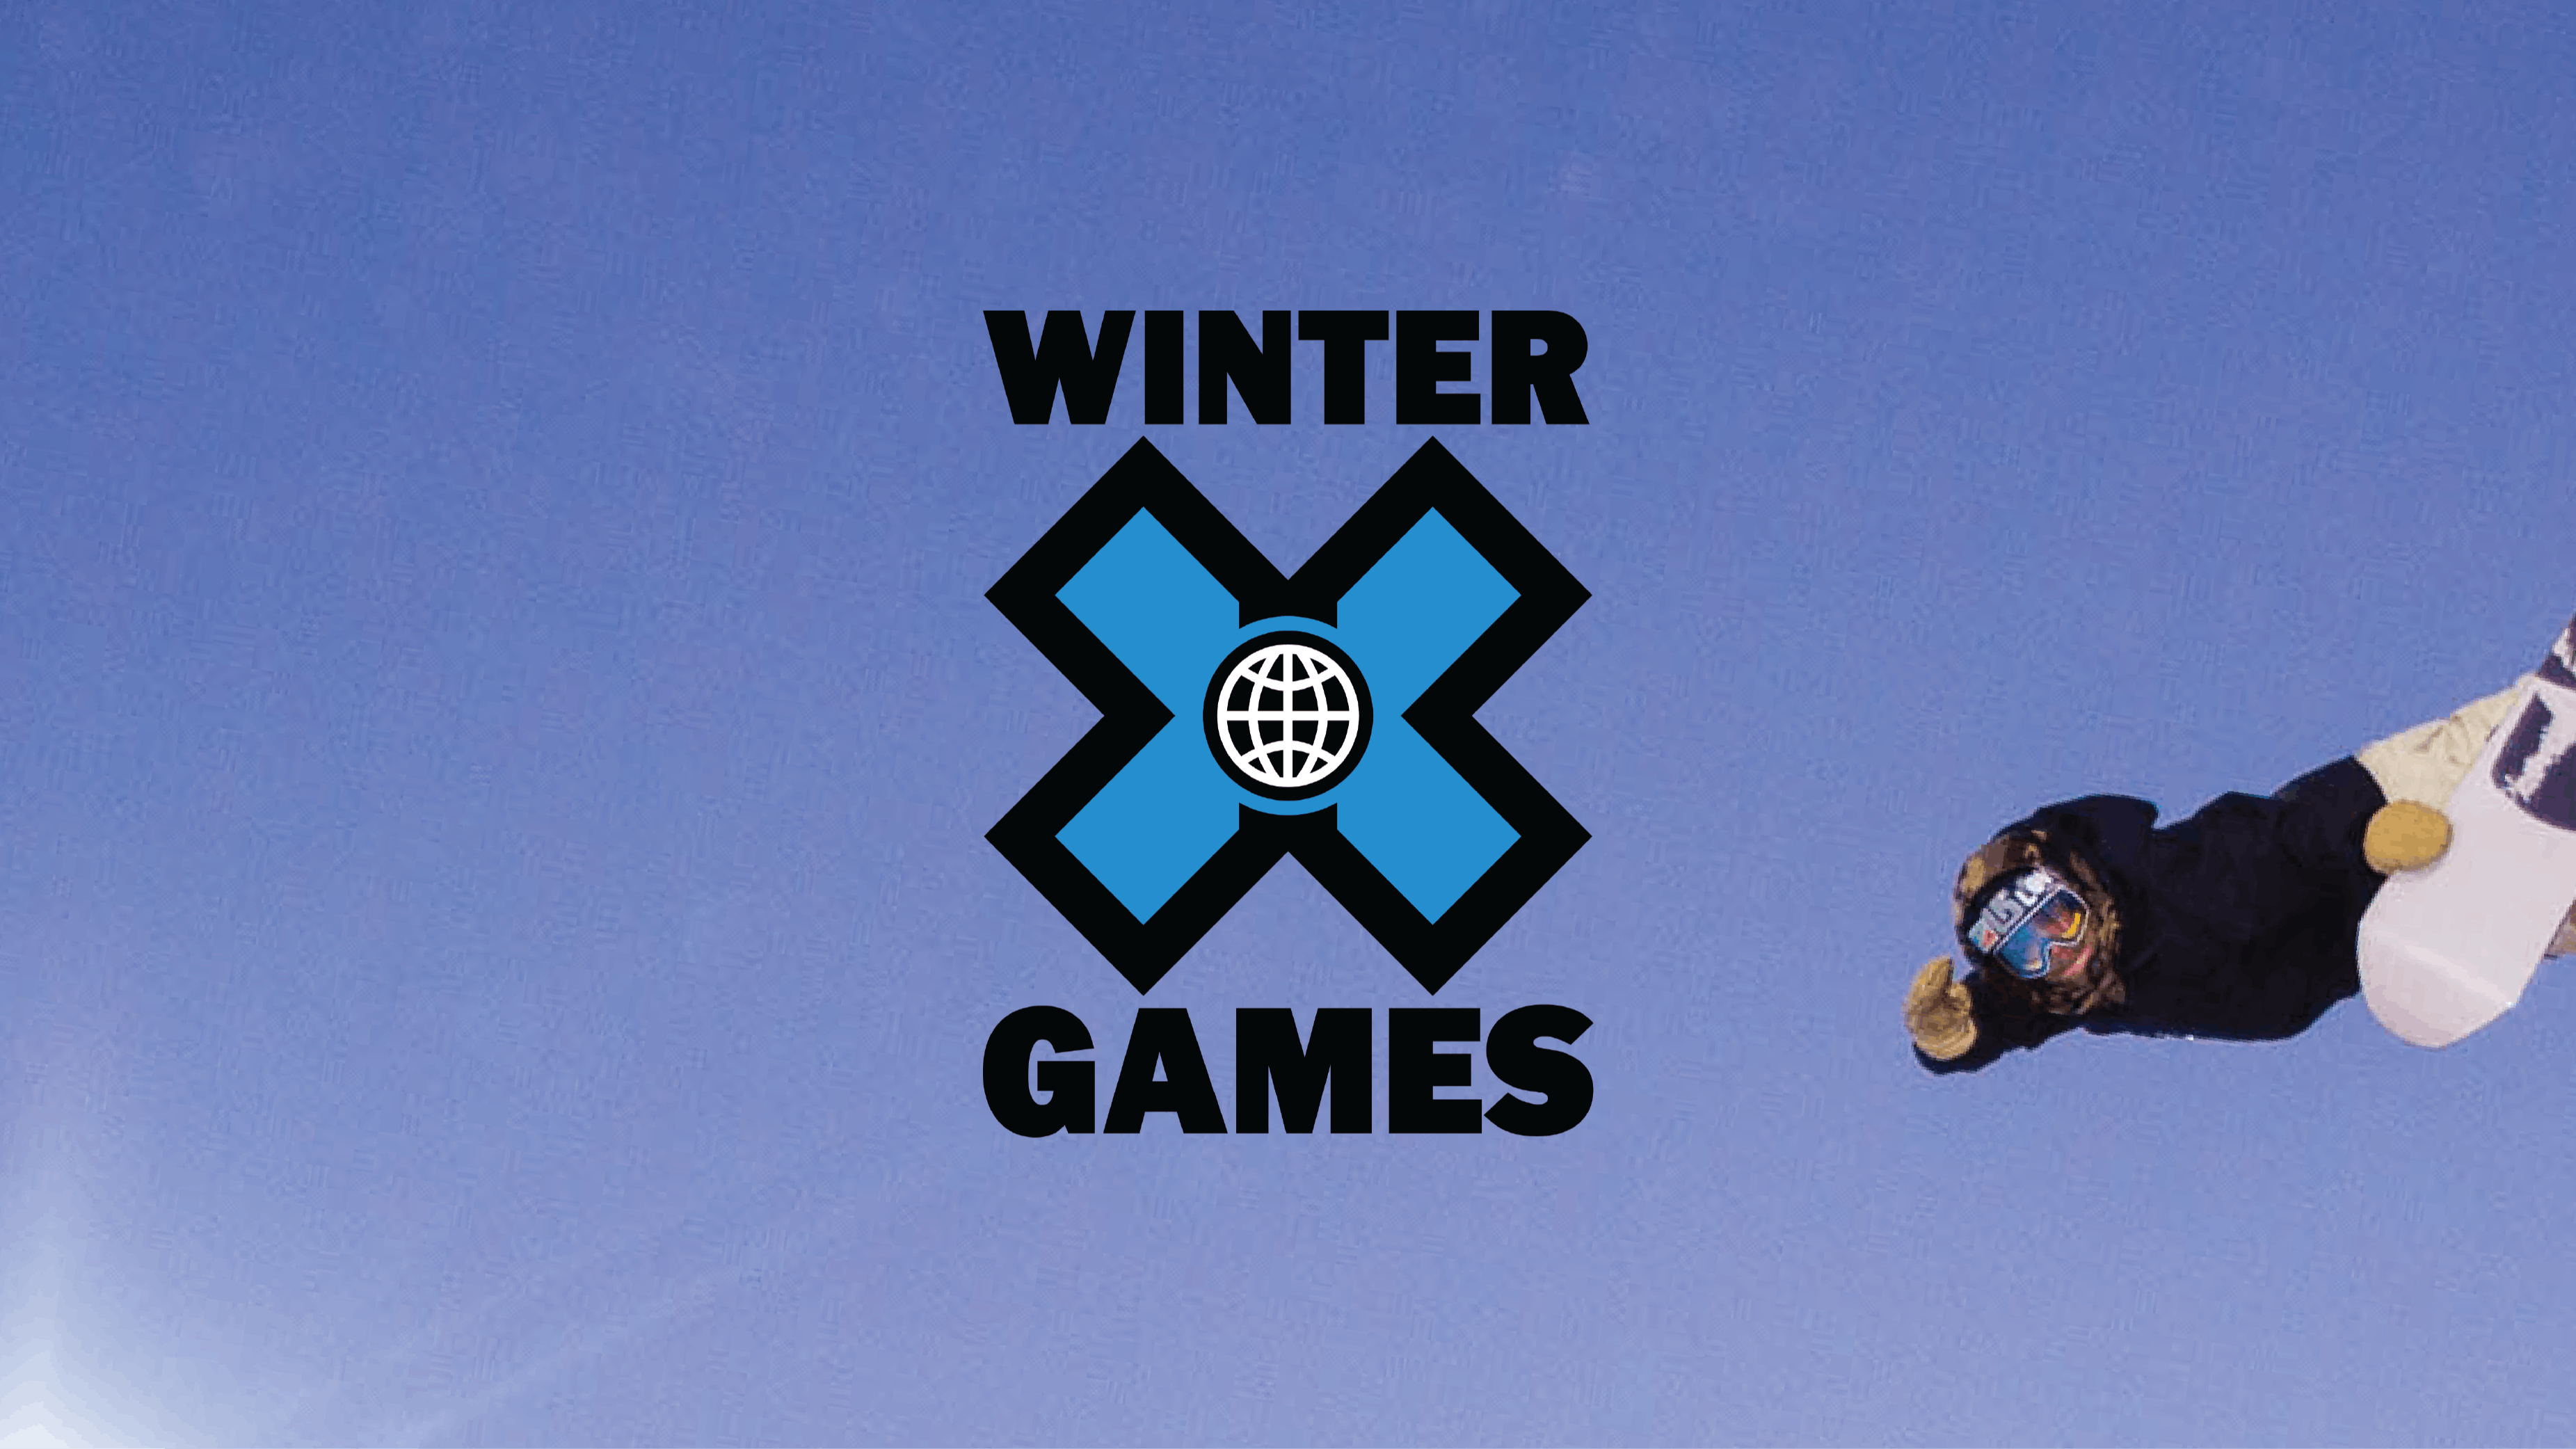 A snowboarder jumps against a blue sky with an added Winter X Games logo on top of the image.